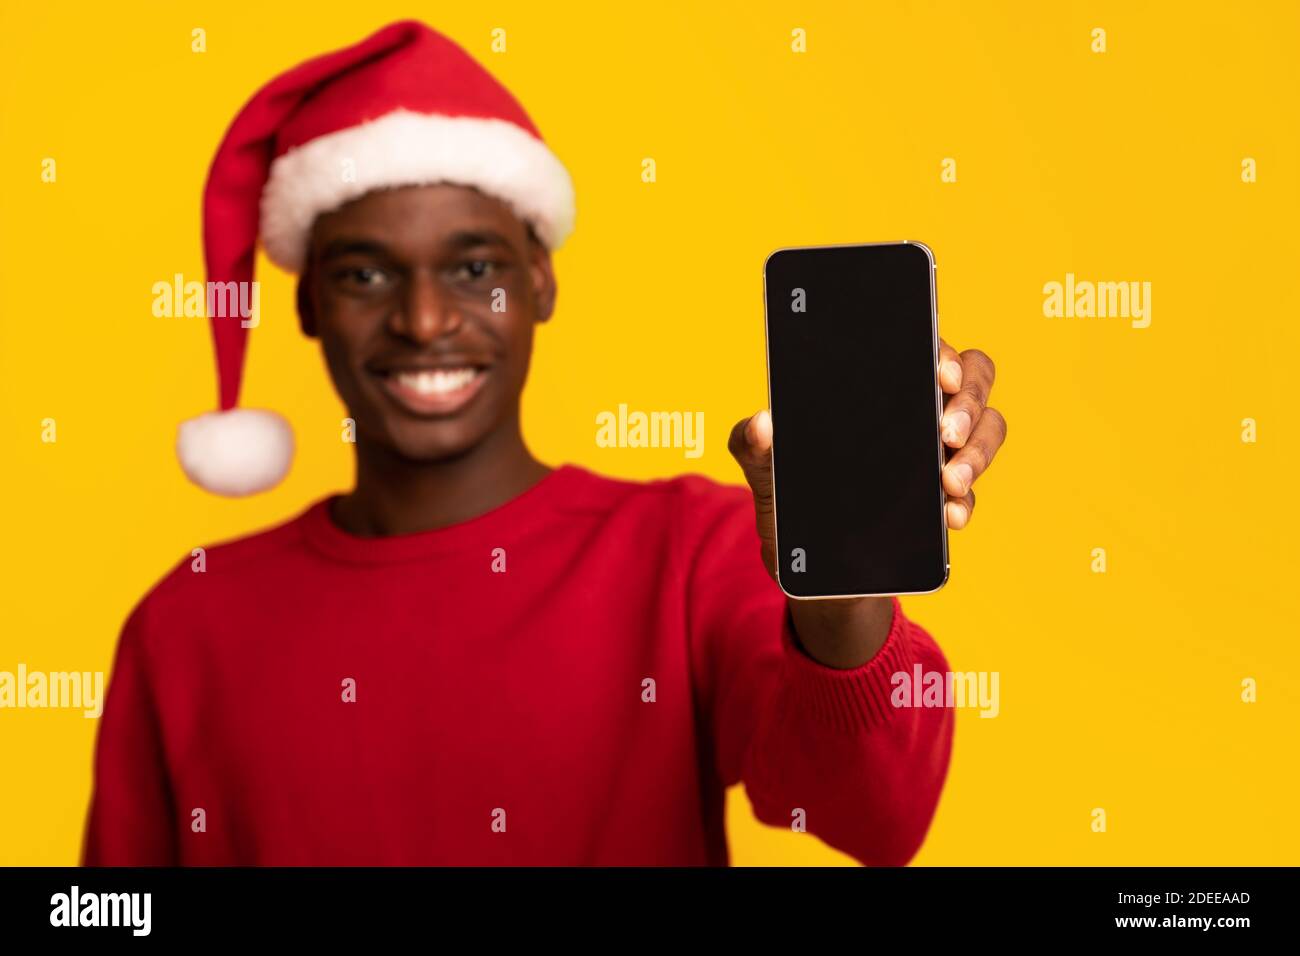 Mockup Of African Guy In Santa Hat Holding Smartphone With Black Screen Stock Photo